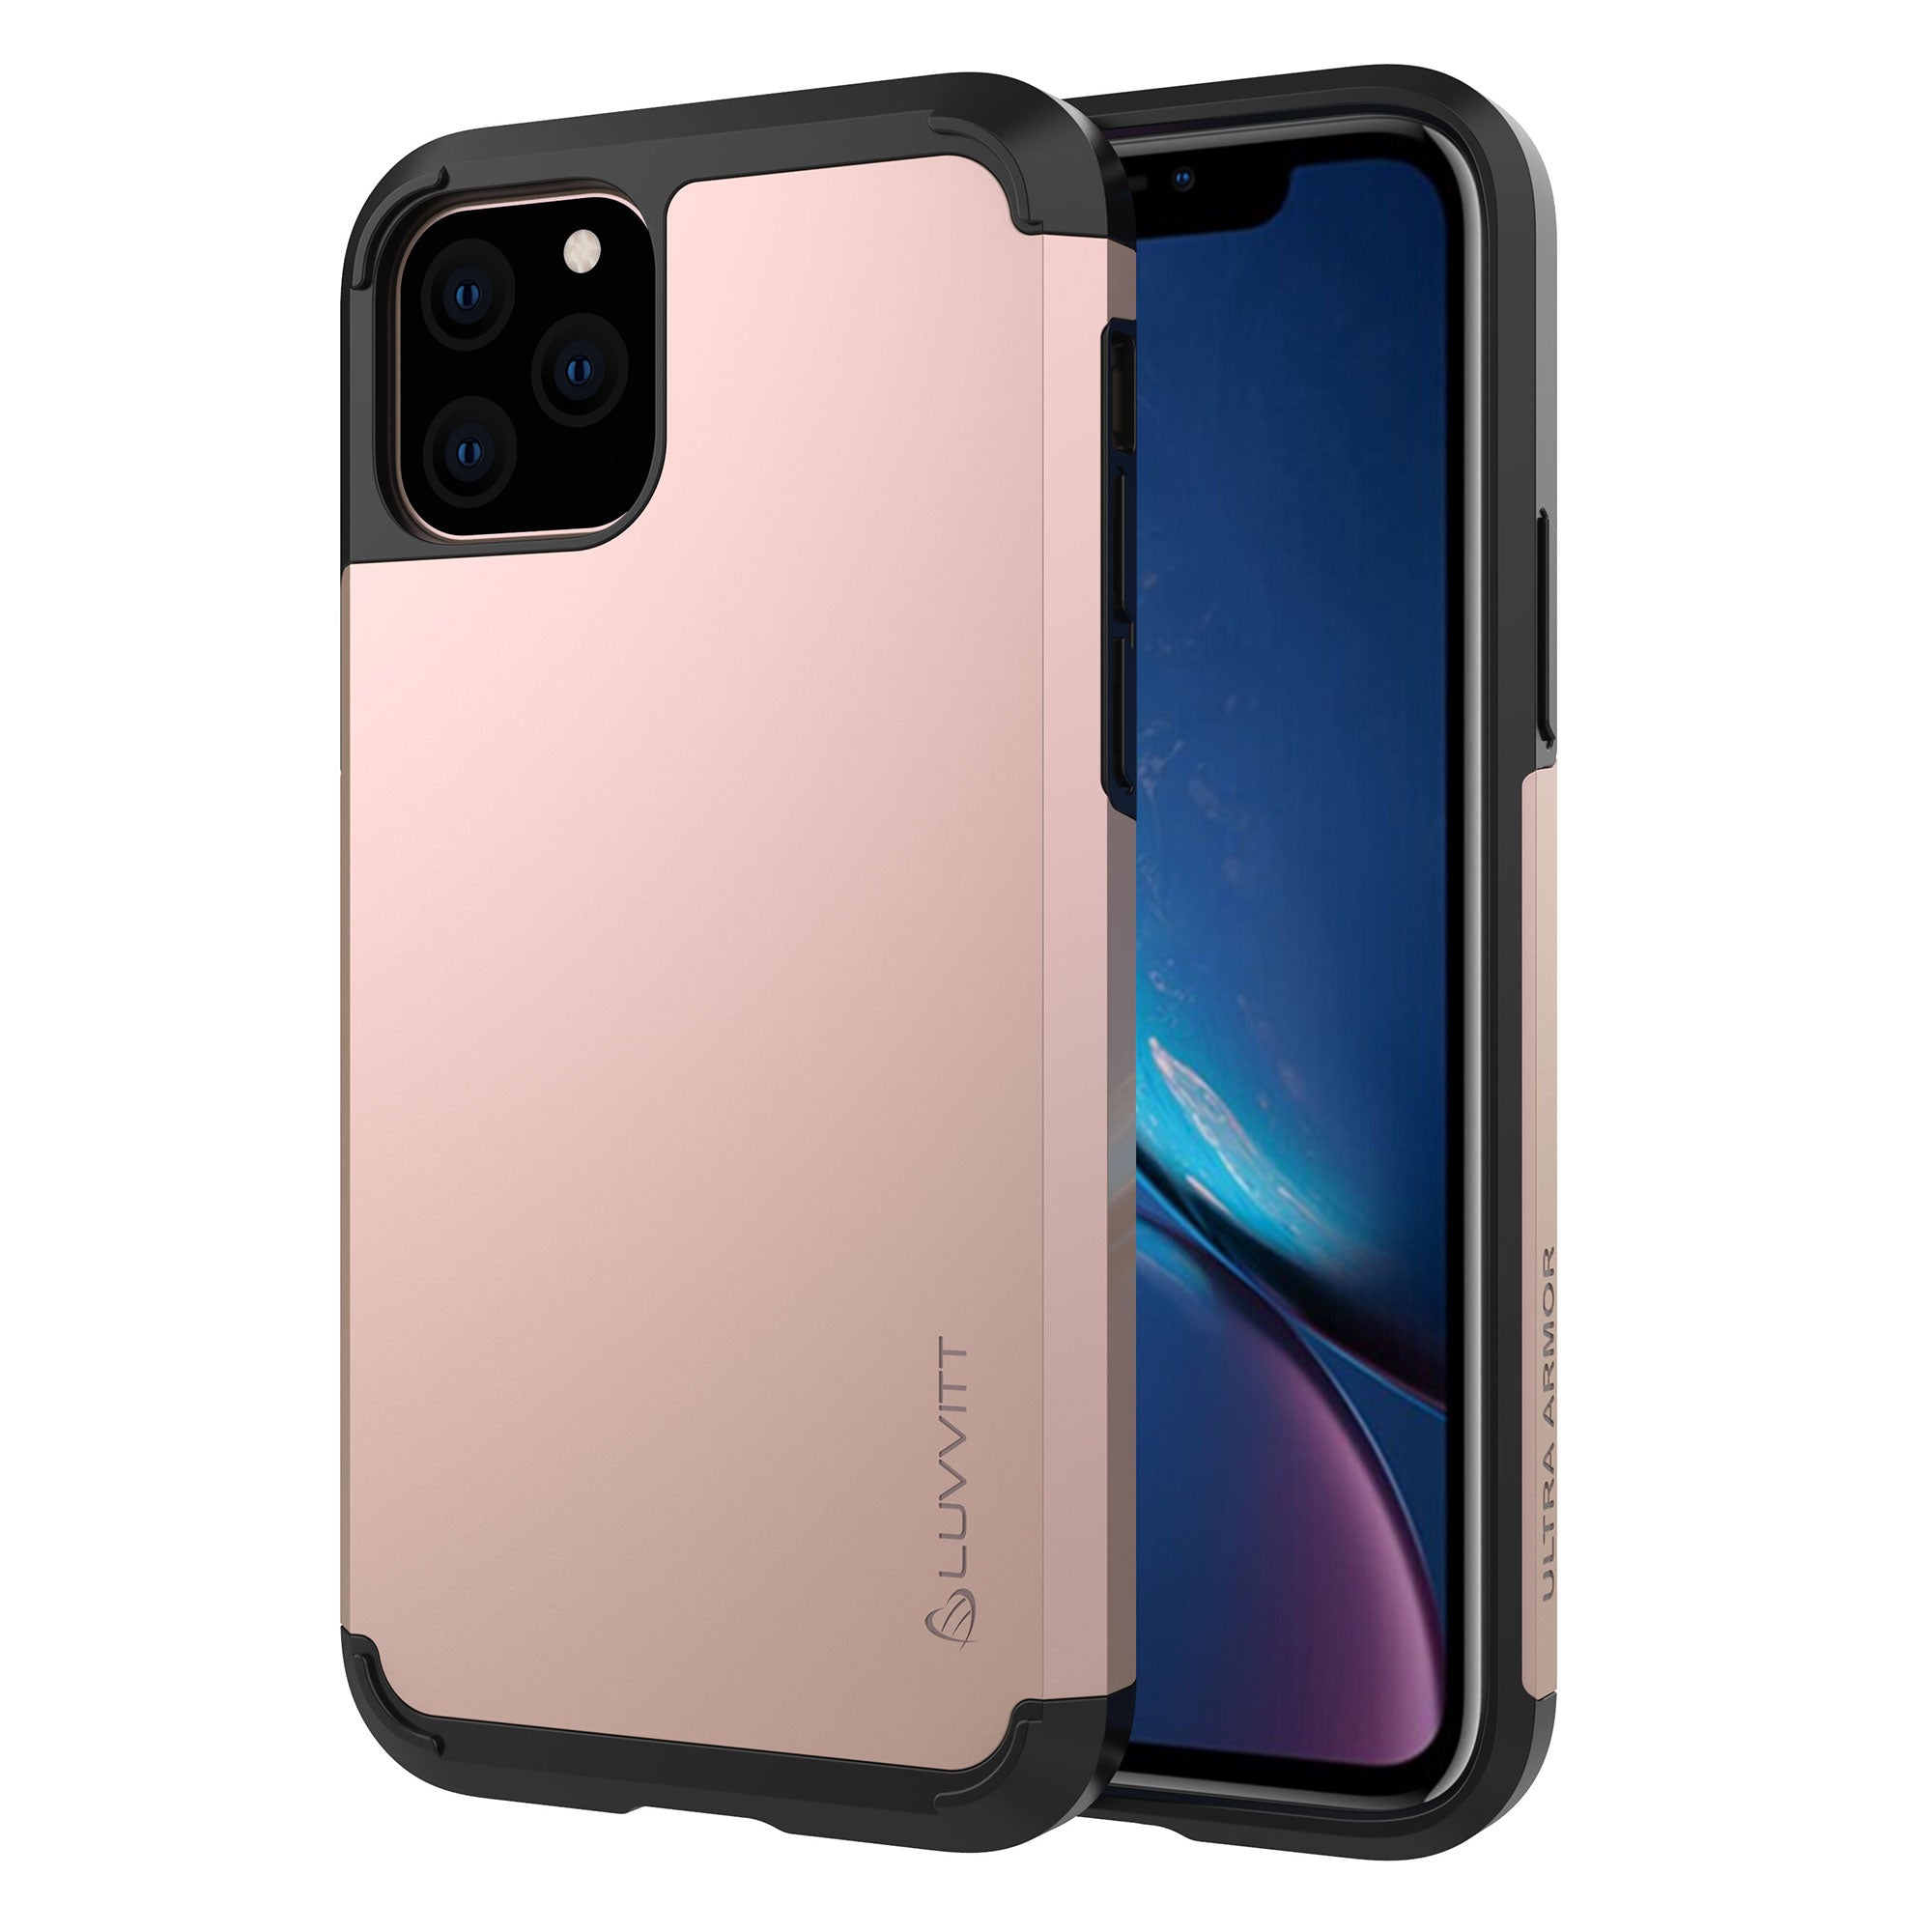 Luvvitt Ultra Armor Dual Layer Heavy Duty Case for iPhone 11 Pro Max 2019 - Rose Gold